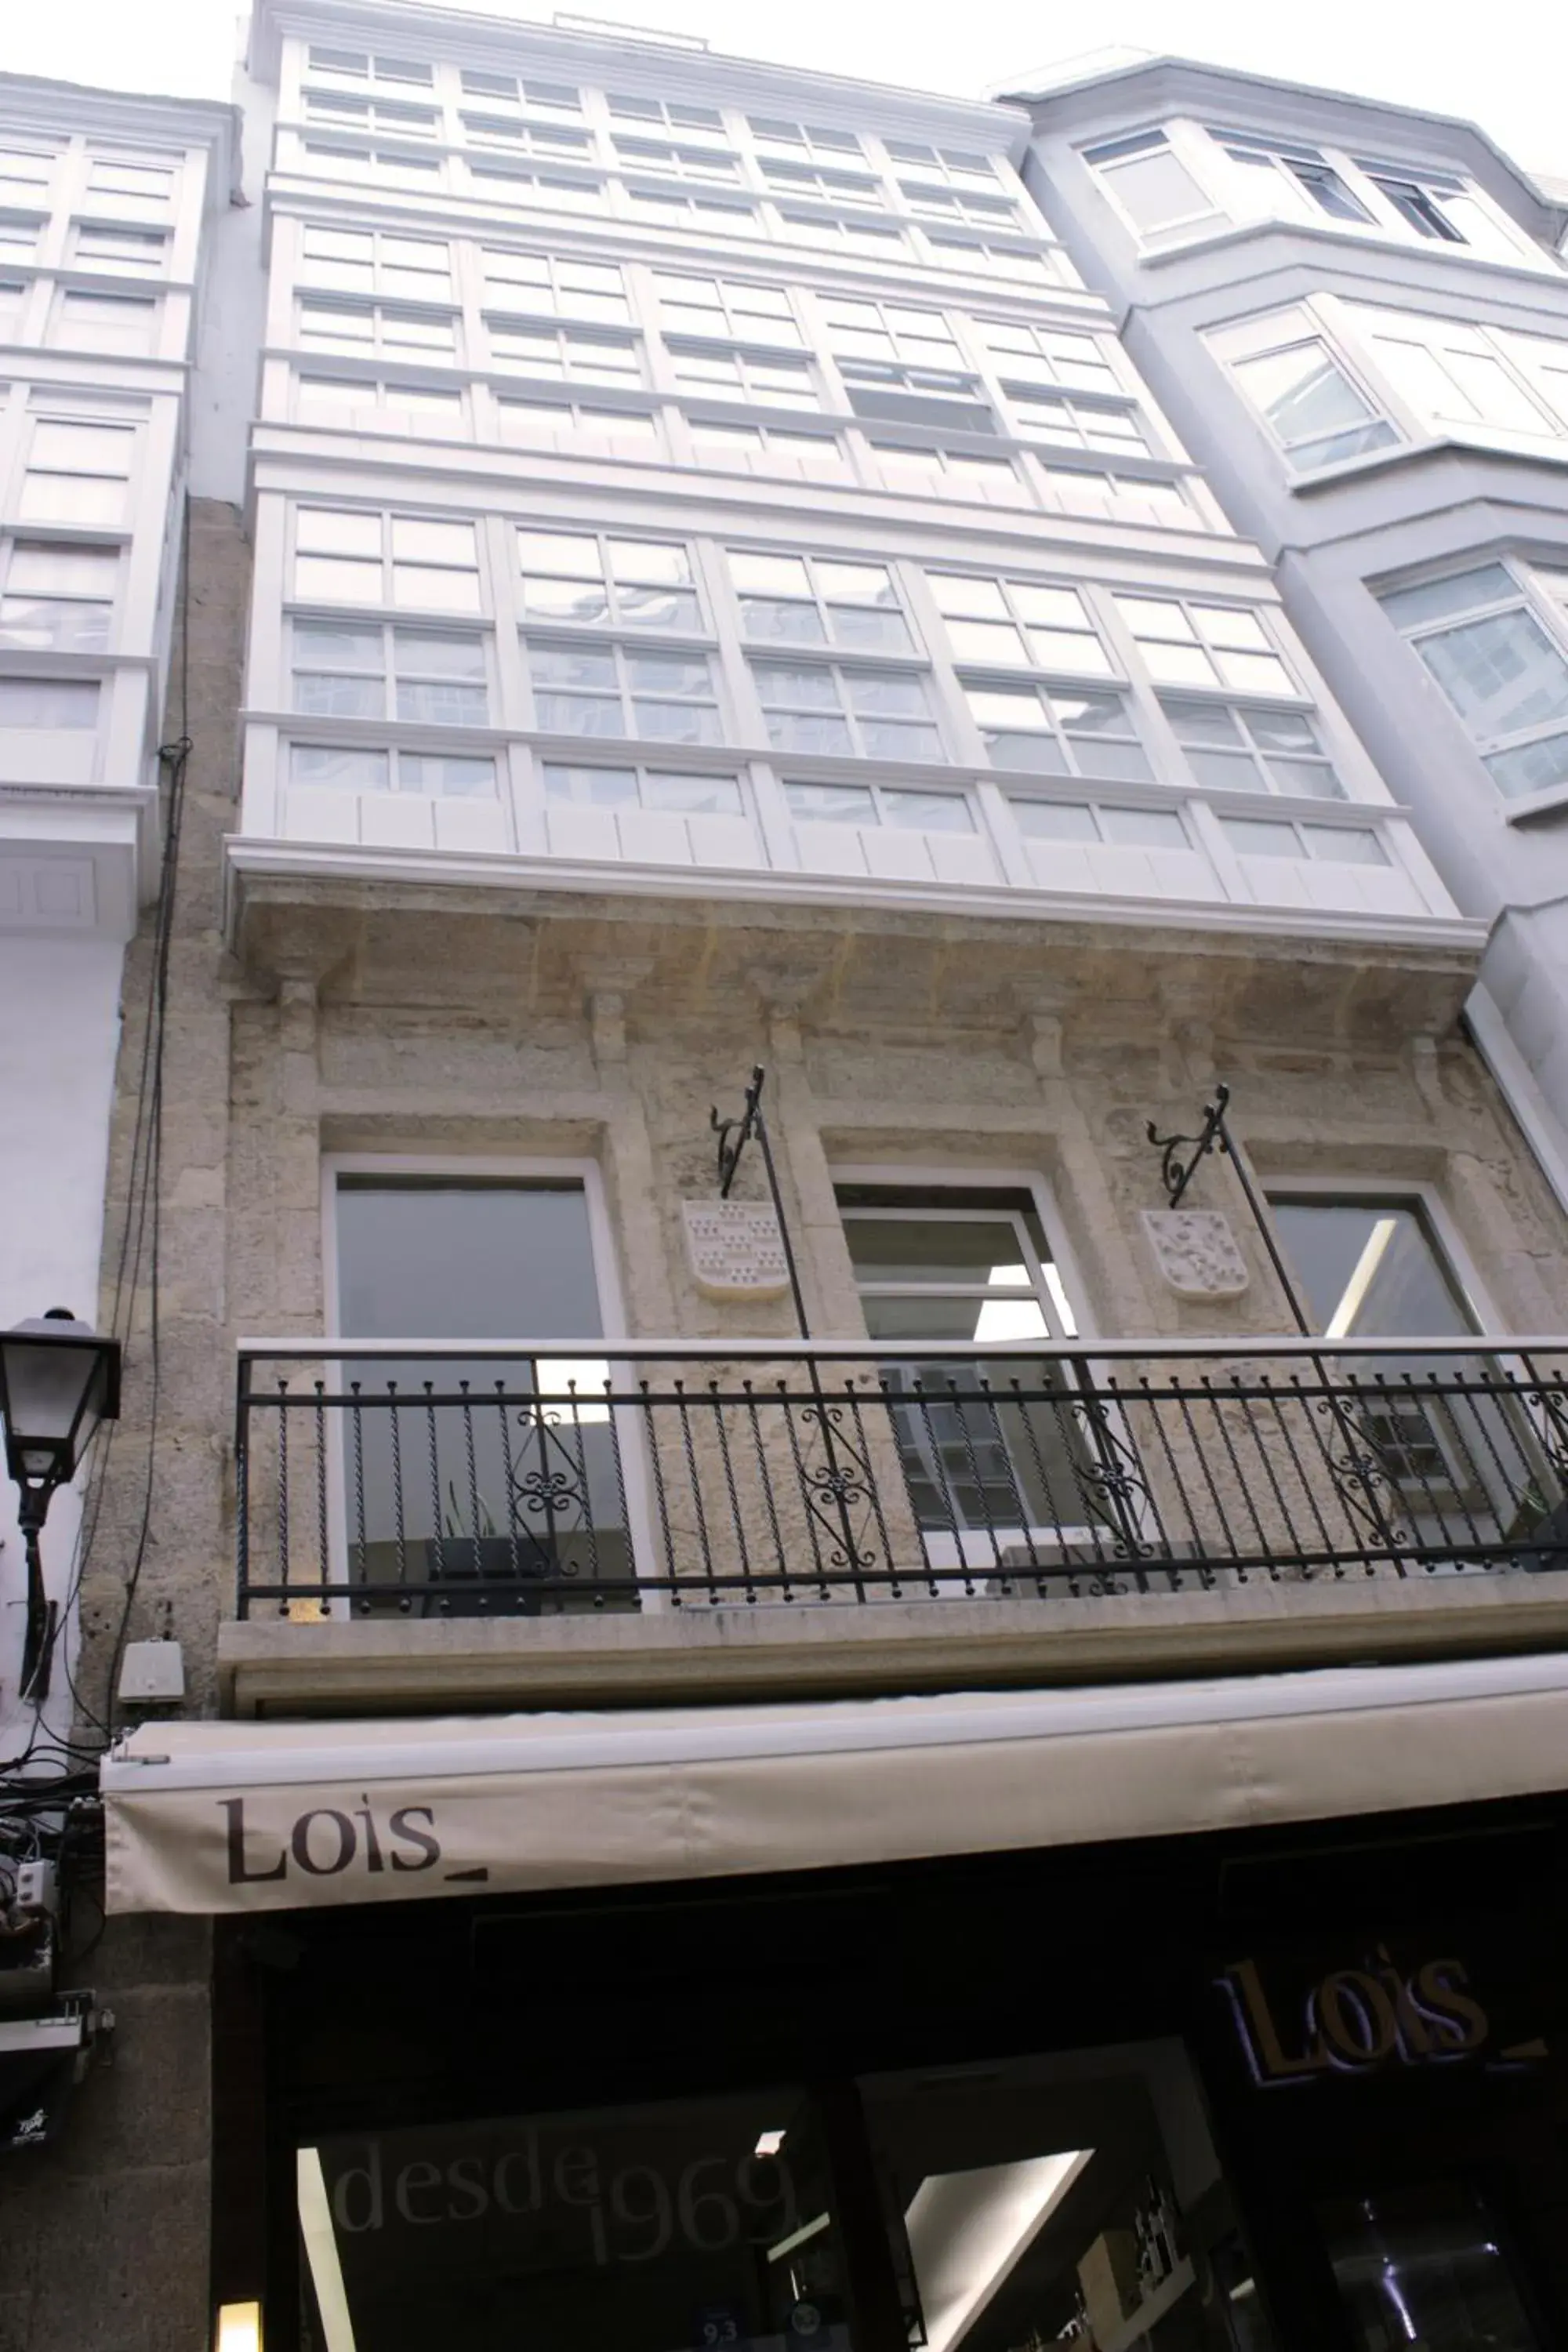 Property building in Hotel Lois